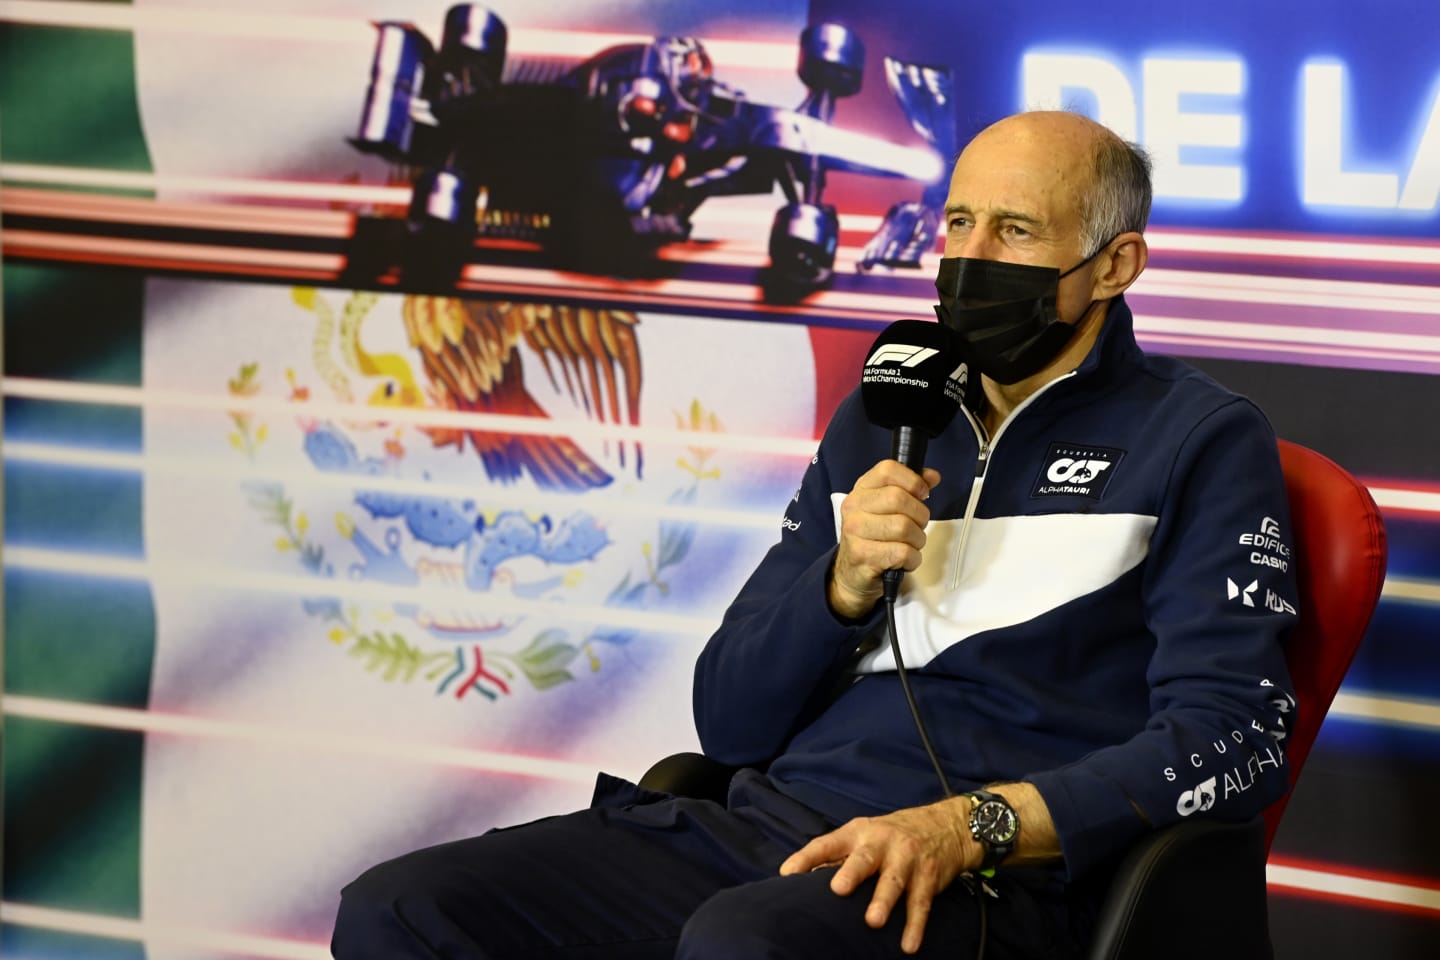 MEXICO CITY, MEXICO - NOVEMBER 05: Scuderia AlphaTauri Team Principal Franz Tost talks in the Team Principals Press Conference during practice ahead of the F1 Grand Prix of Mexico at Autodromo Hermanos Rodriguez on November 05, 2021 in Mexico City, Mexico. (Photo by Mark Sutton - Pool/Getty Images)